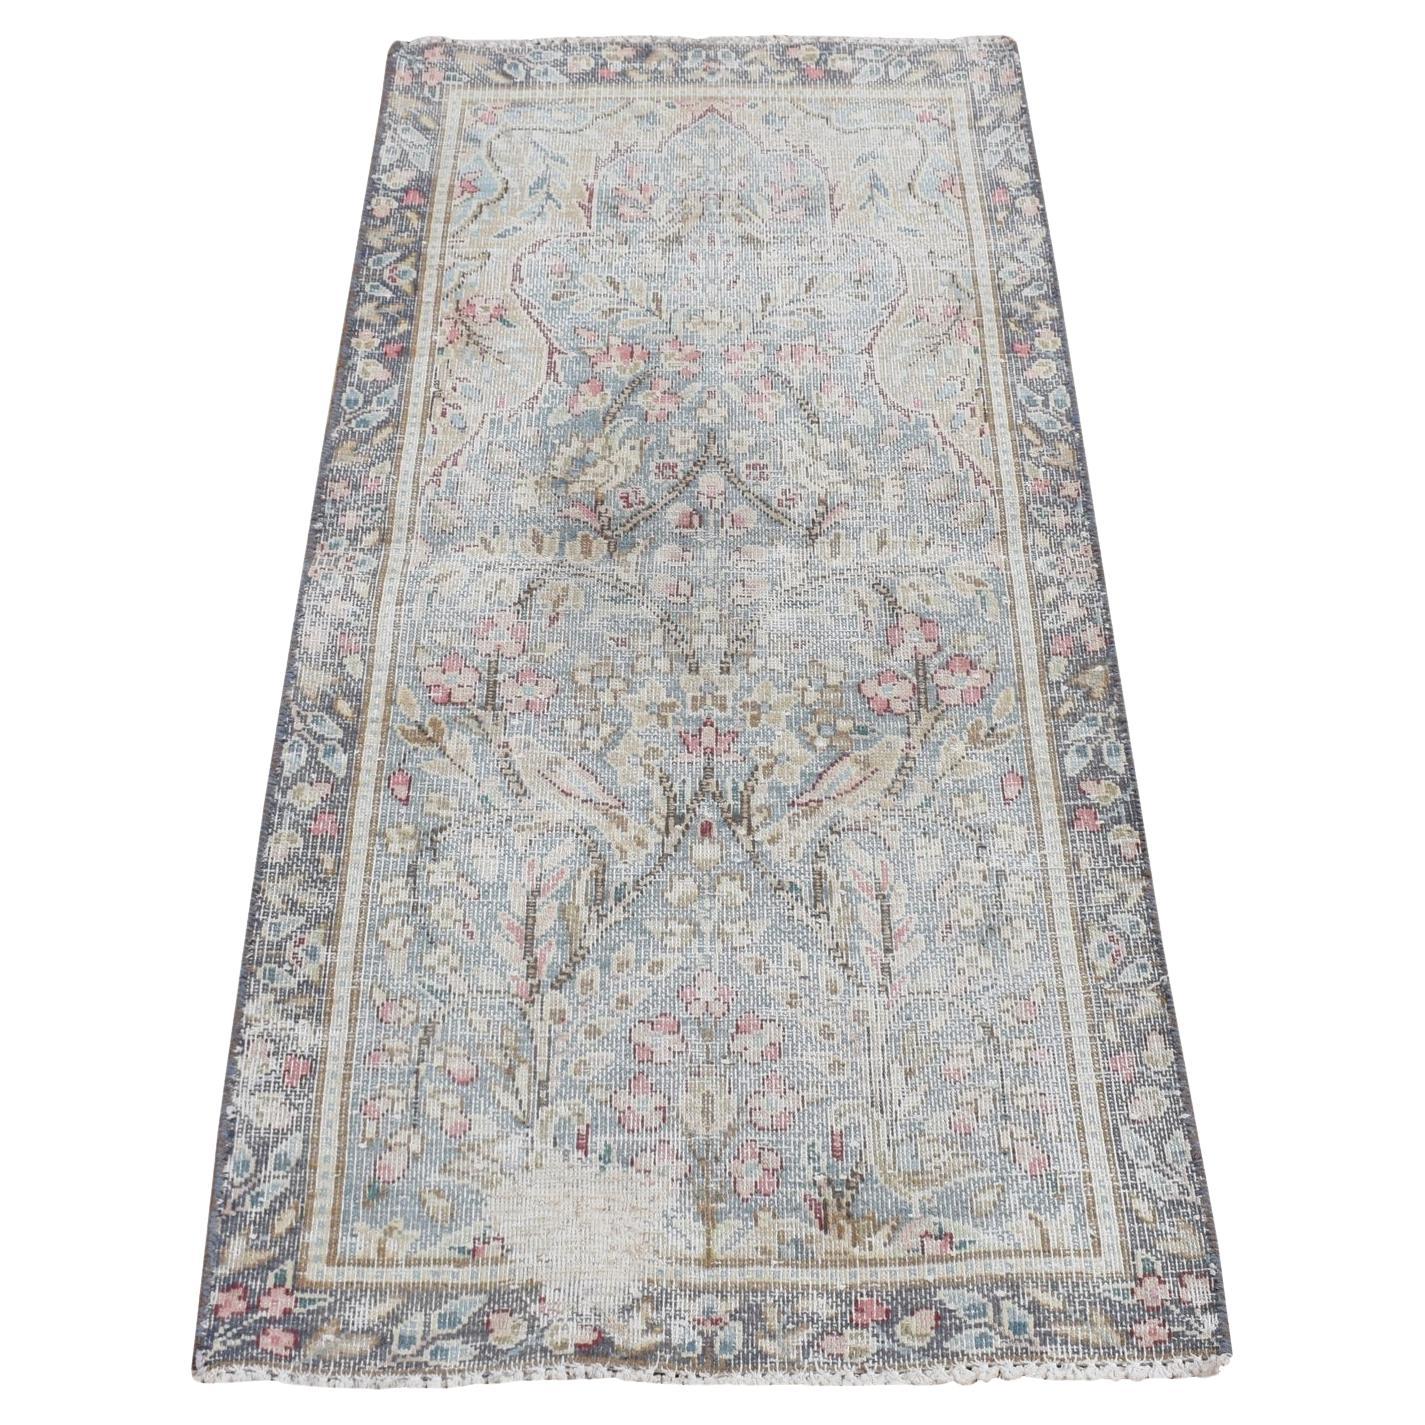 Stone Blue Vintage Persian Kerman Hand Knotted Pure Wool Worn Down Rug 1'9"x3'7" For Sale